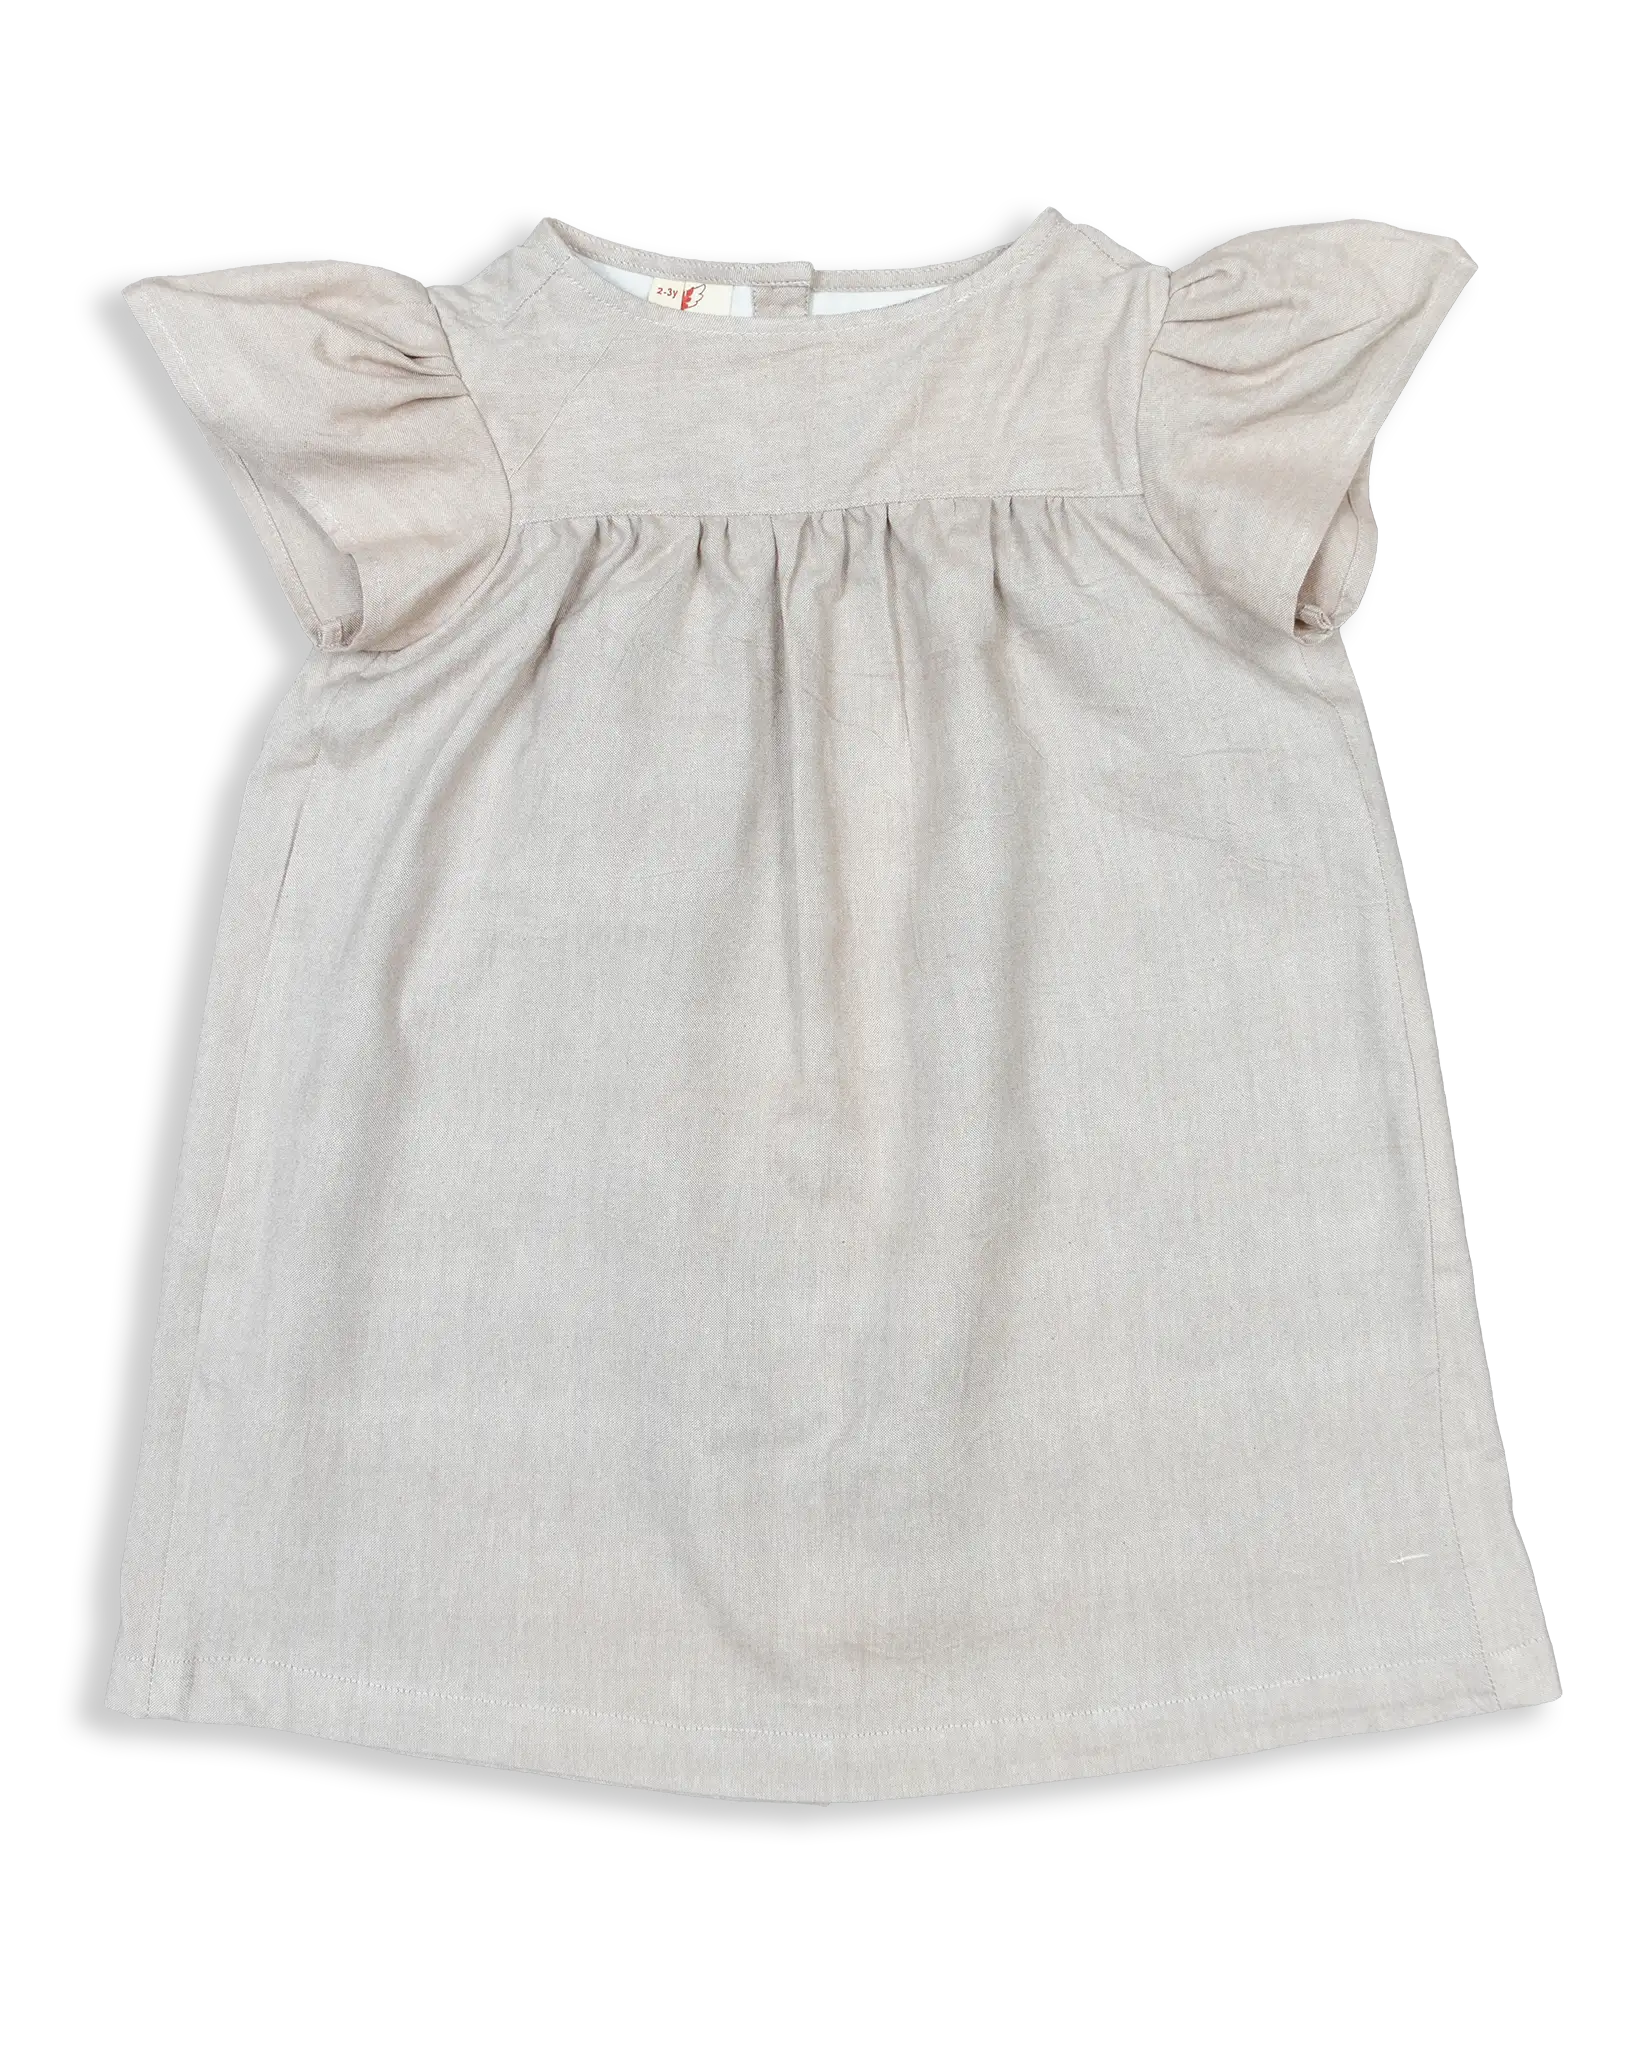 Sweet Sima Dress - the perfect dress for your little girl. Made with 100% cotton and crafted with care in Nepal, this dress combines comfort and quality in a beautiful and timeless design. This dress is perfect for any occasion - whether it's a special event or just a day out with family and friends. The breathable cotton material ensures maximum comfort, while the lightweight fabric allows for easy movement and play.